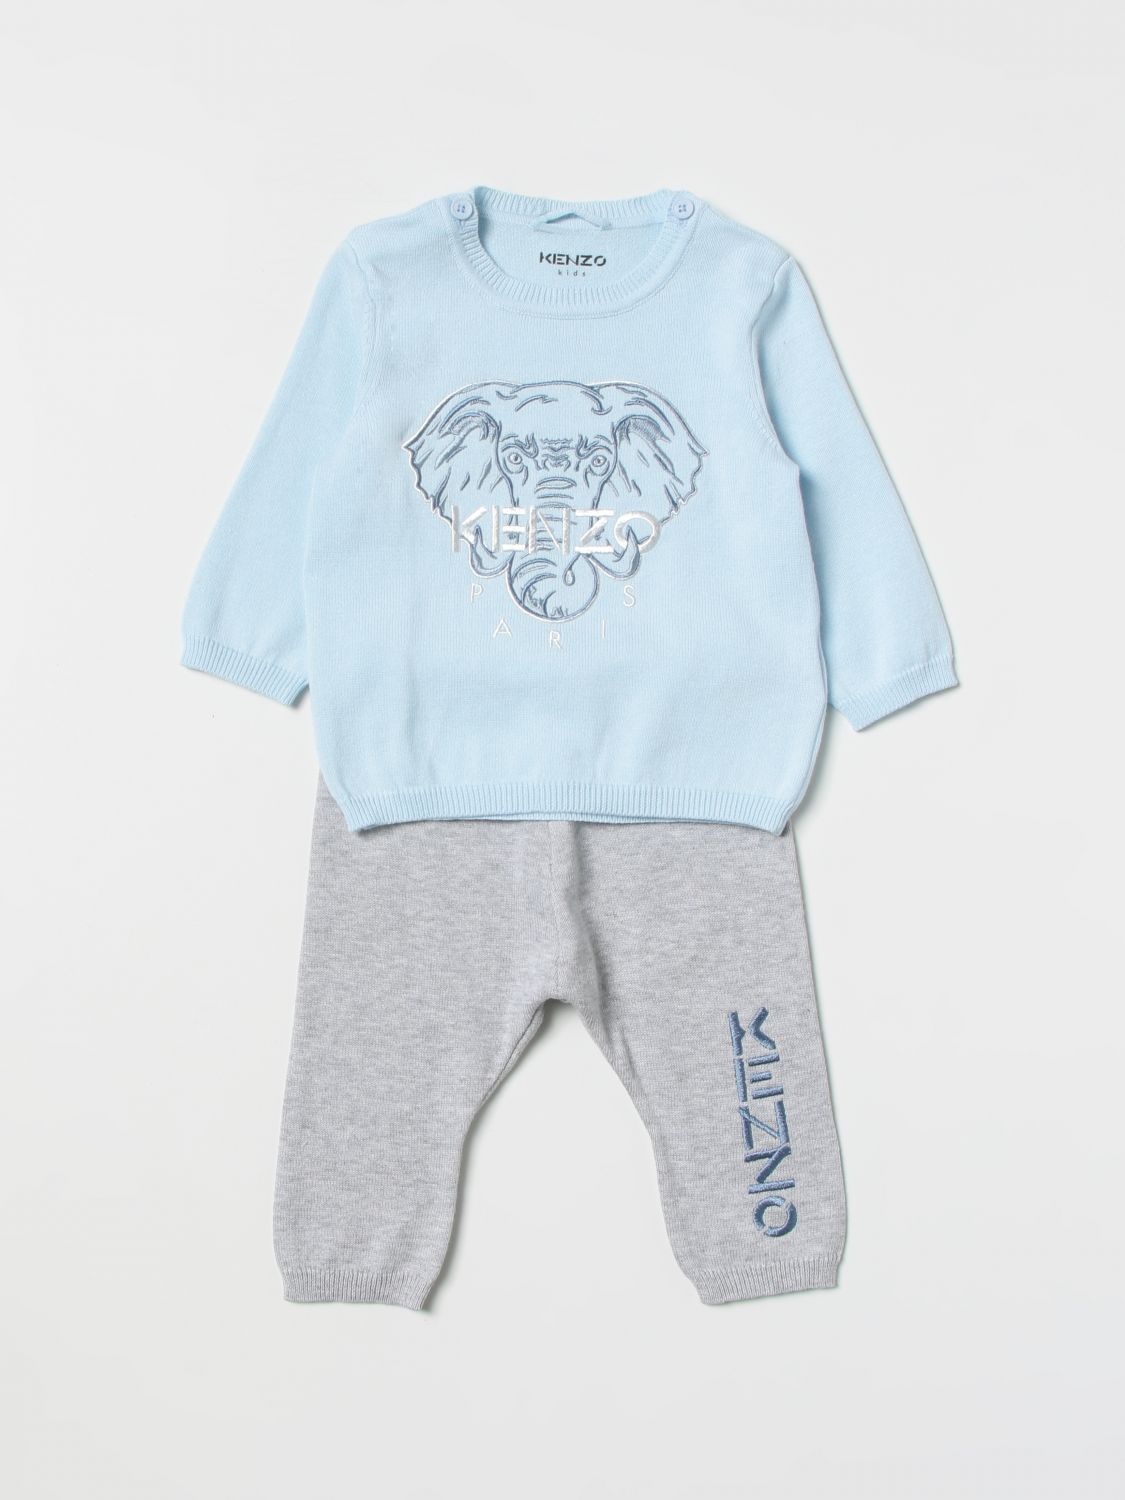 Kenzo Kid's Knitted Outfit - Color: Pale Blue - Kids Premium Clothing -